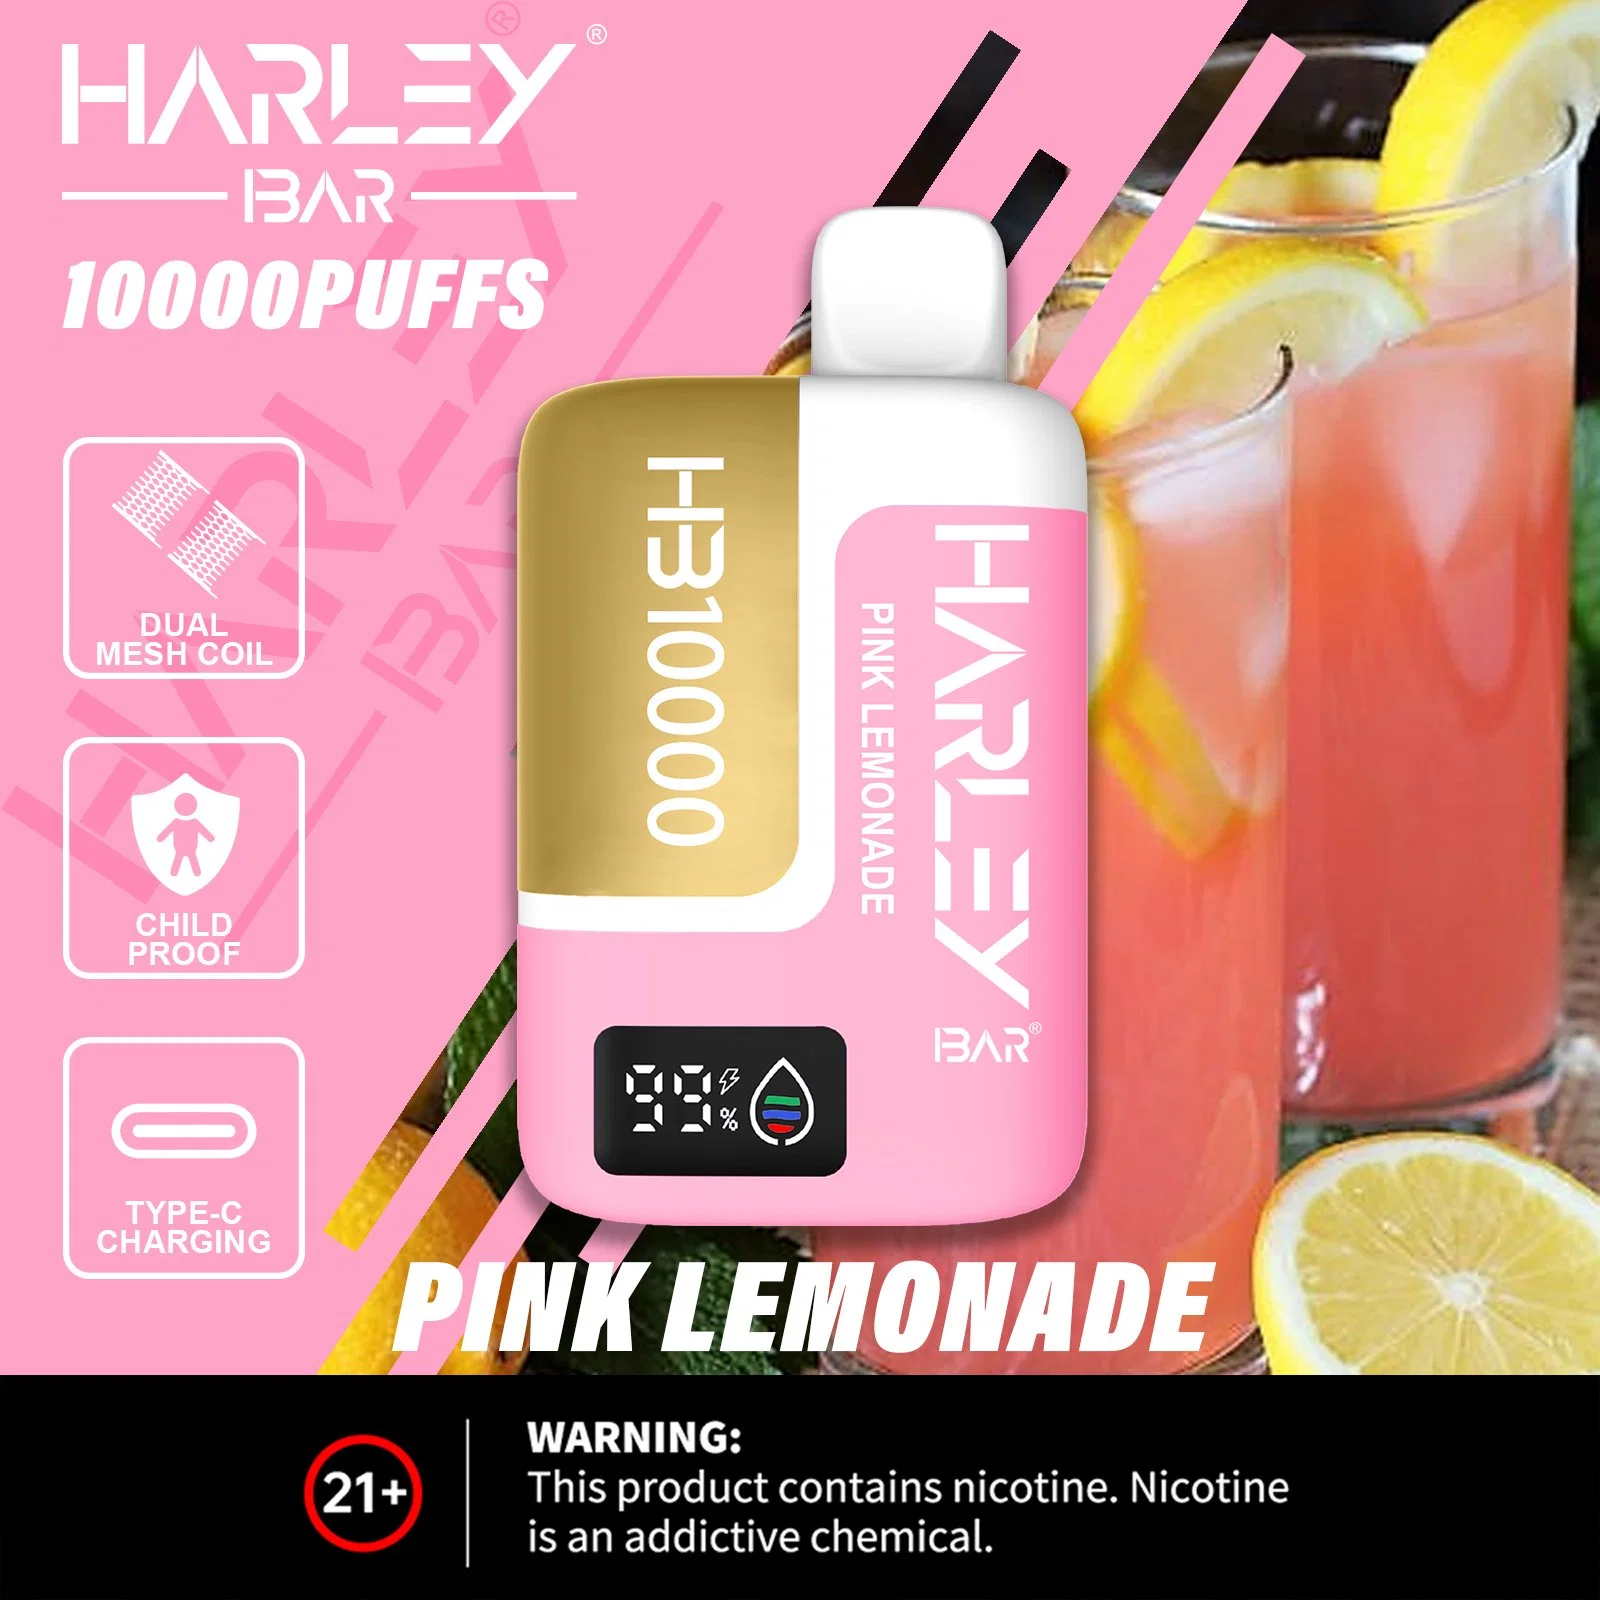 Factory Price Vape Distributors Dual Mesh Coil Harleybar Hb10000 Puff Disposable/Chargeable Vape 8000 10000 12000 12K Puffs Shipping to USA Spain France U. K Germany